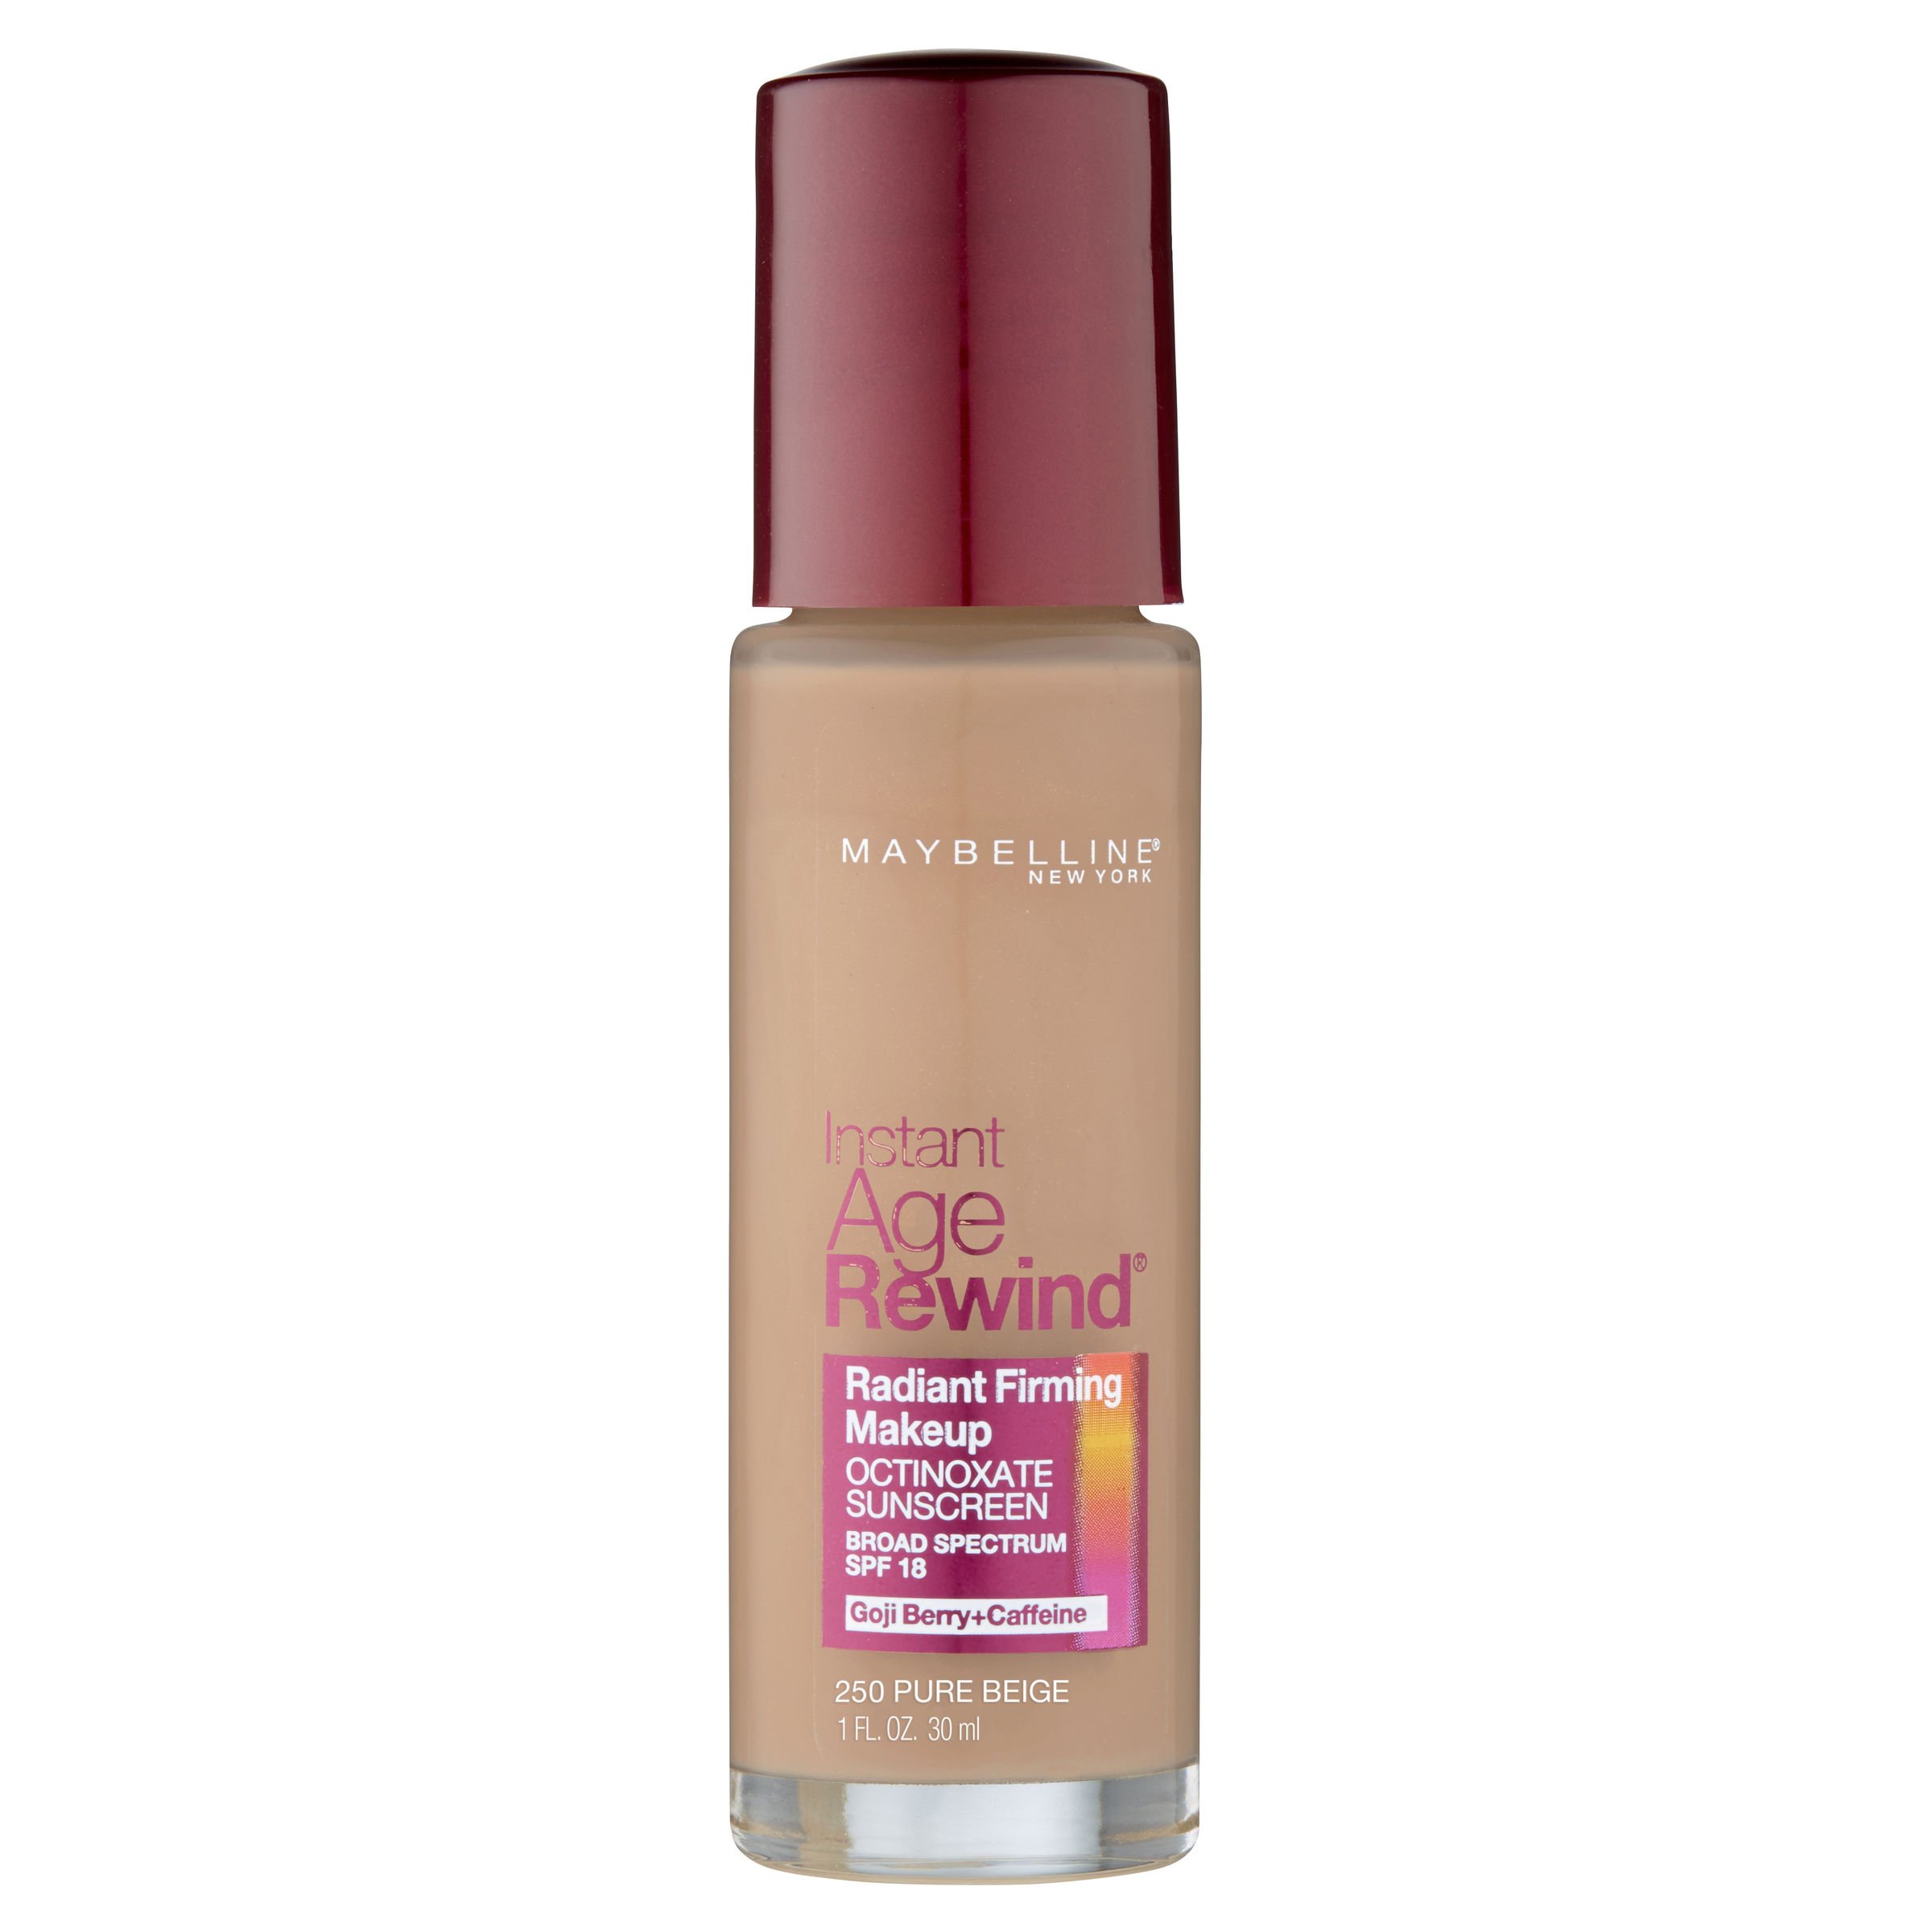 Maybelline New York Instant Age Rewind Radiant Firming Makeup, Pure Beige 250, 1 Fluid Ounce